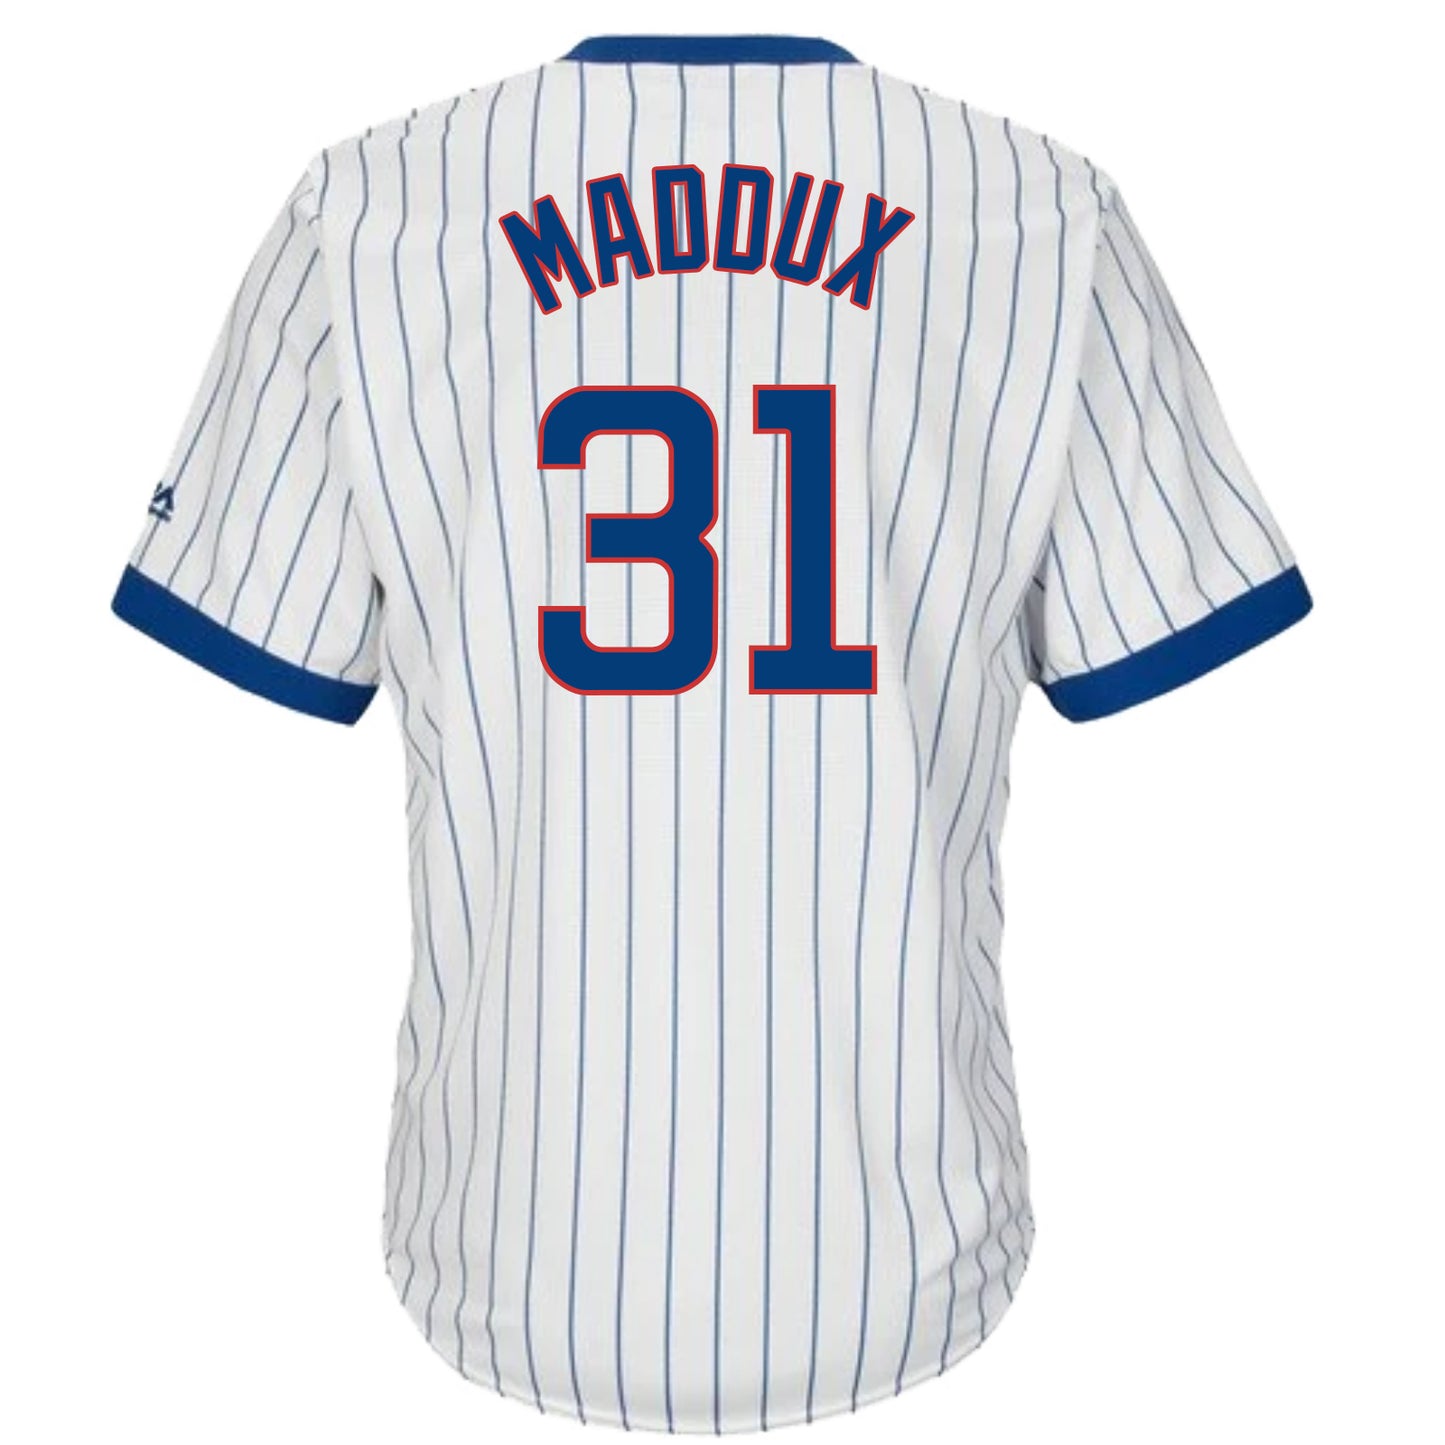 Greg Maddux Chicago Cubs Cooperstown White Pinstripe V-Neck Home Men's Jersey